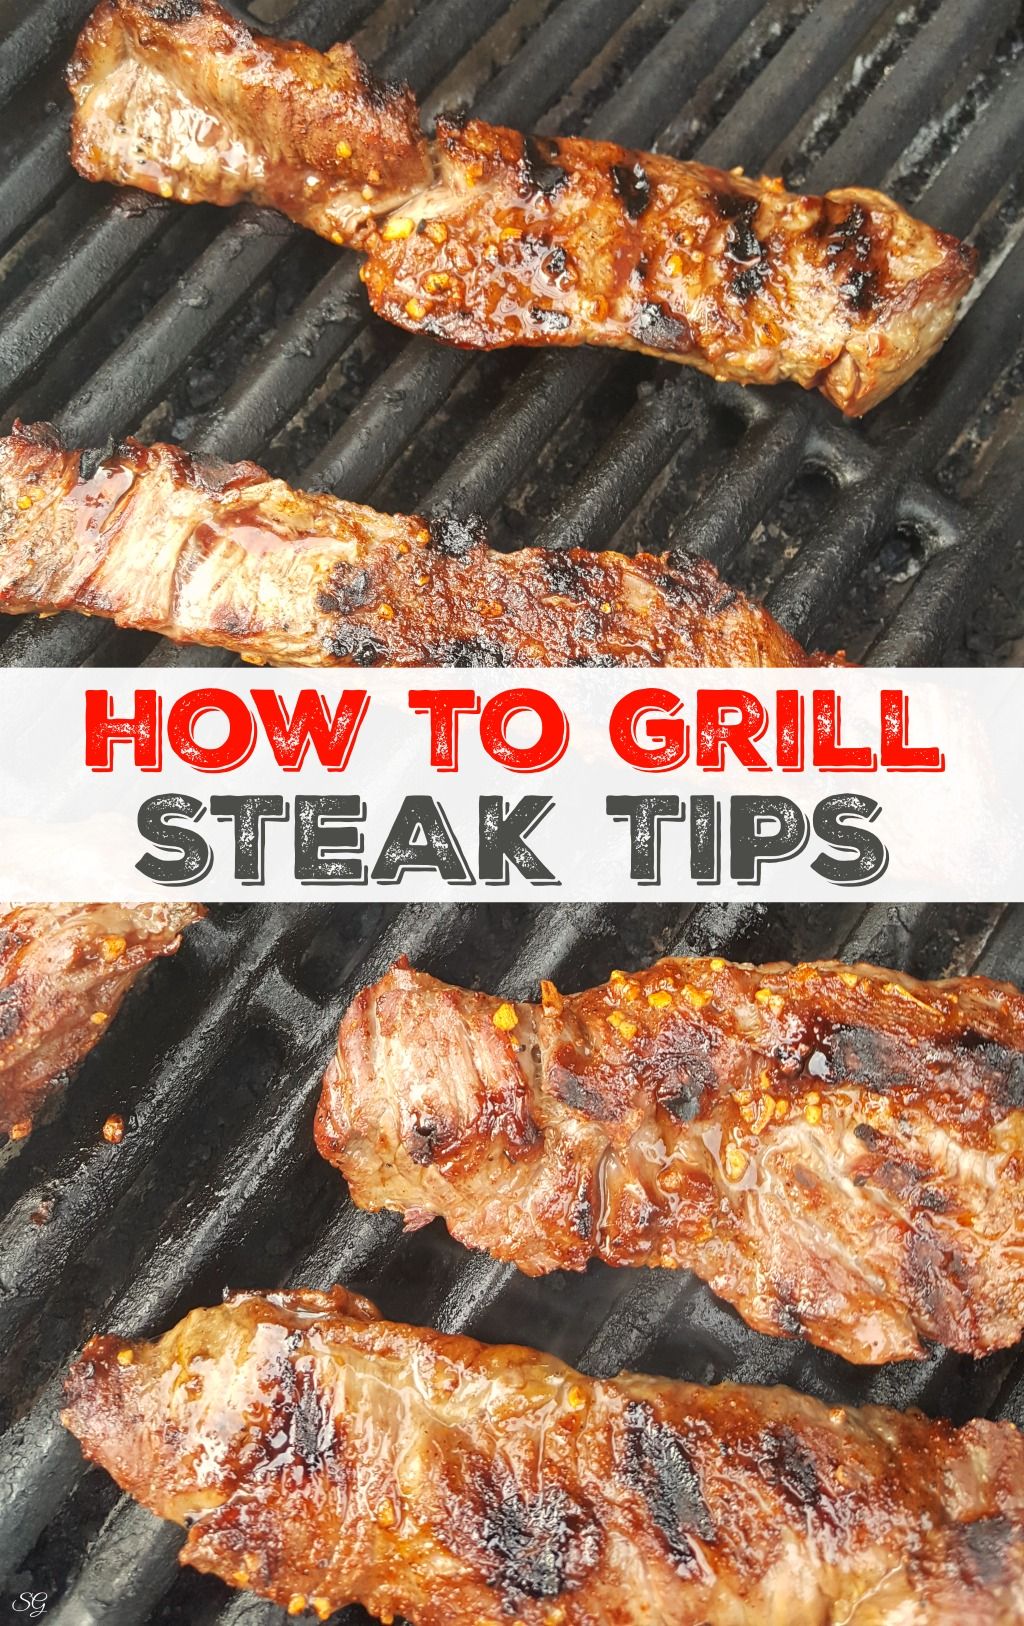 How To Grill Steak Tips. Cooking the perfect steak tips on ...